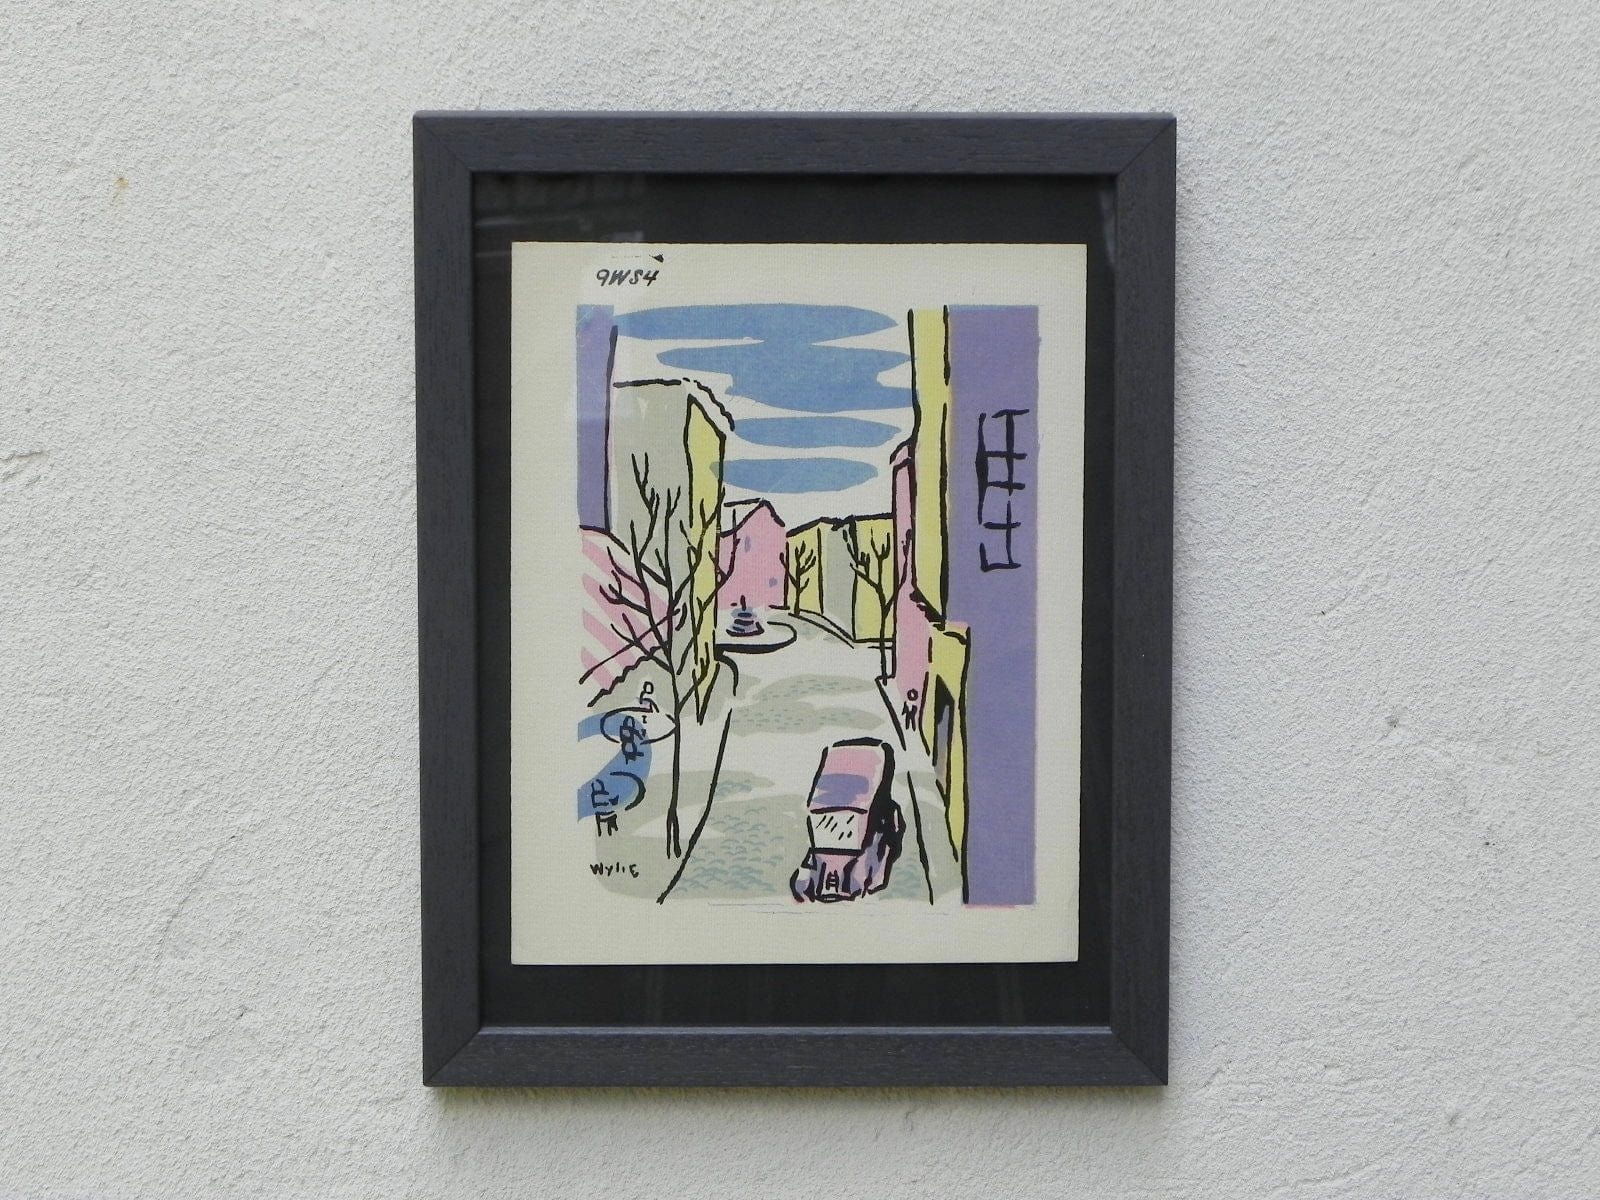 I Like Mike's Mid Century Modern Wall Decor & Art Mid-Century Lithograph by Wylie Newly Framed-Street Scene with Café, Back Fountain & Truck, Pastel Colors